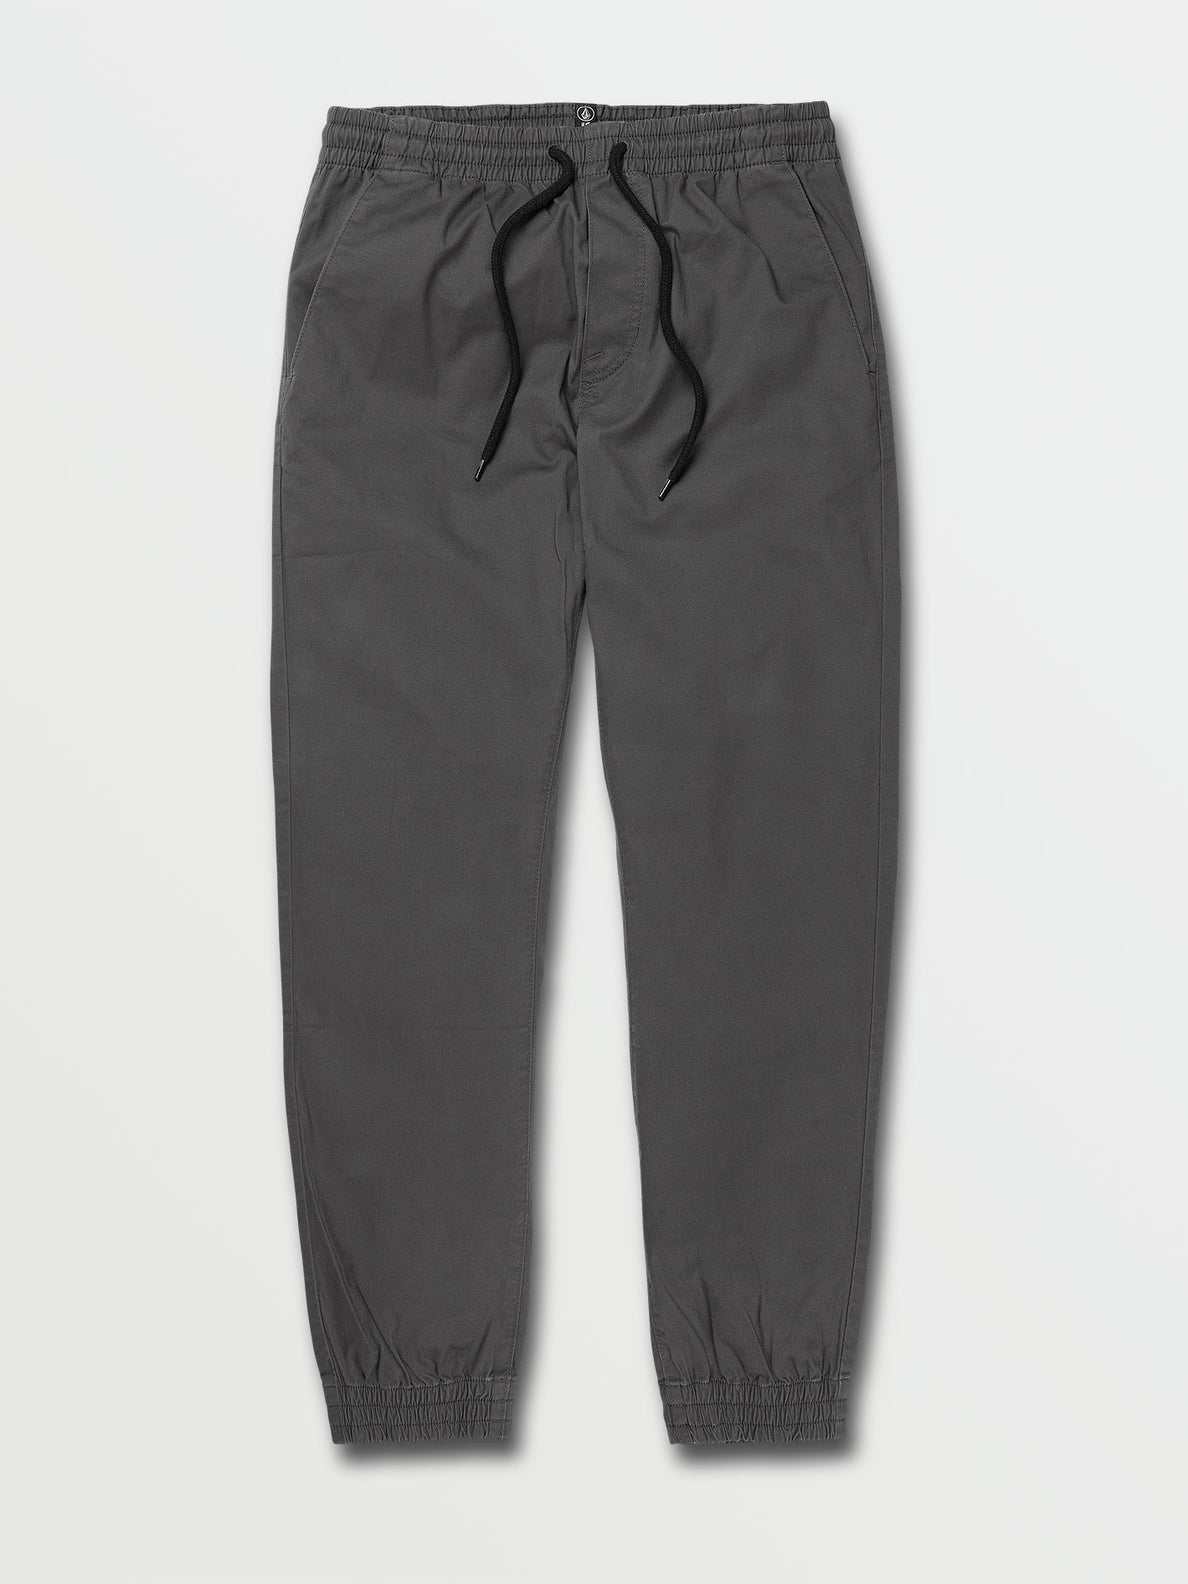 Cleaver Jogger - Charcoal (A1202103_CHR) [F]